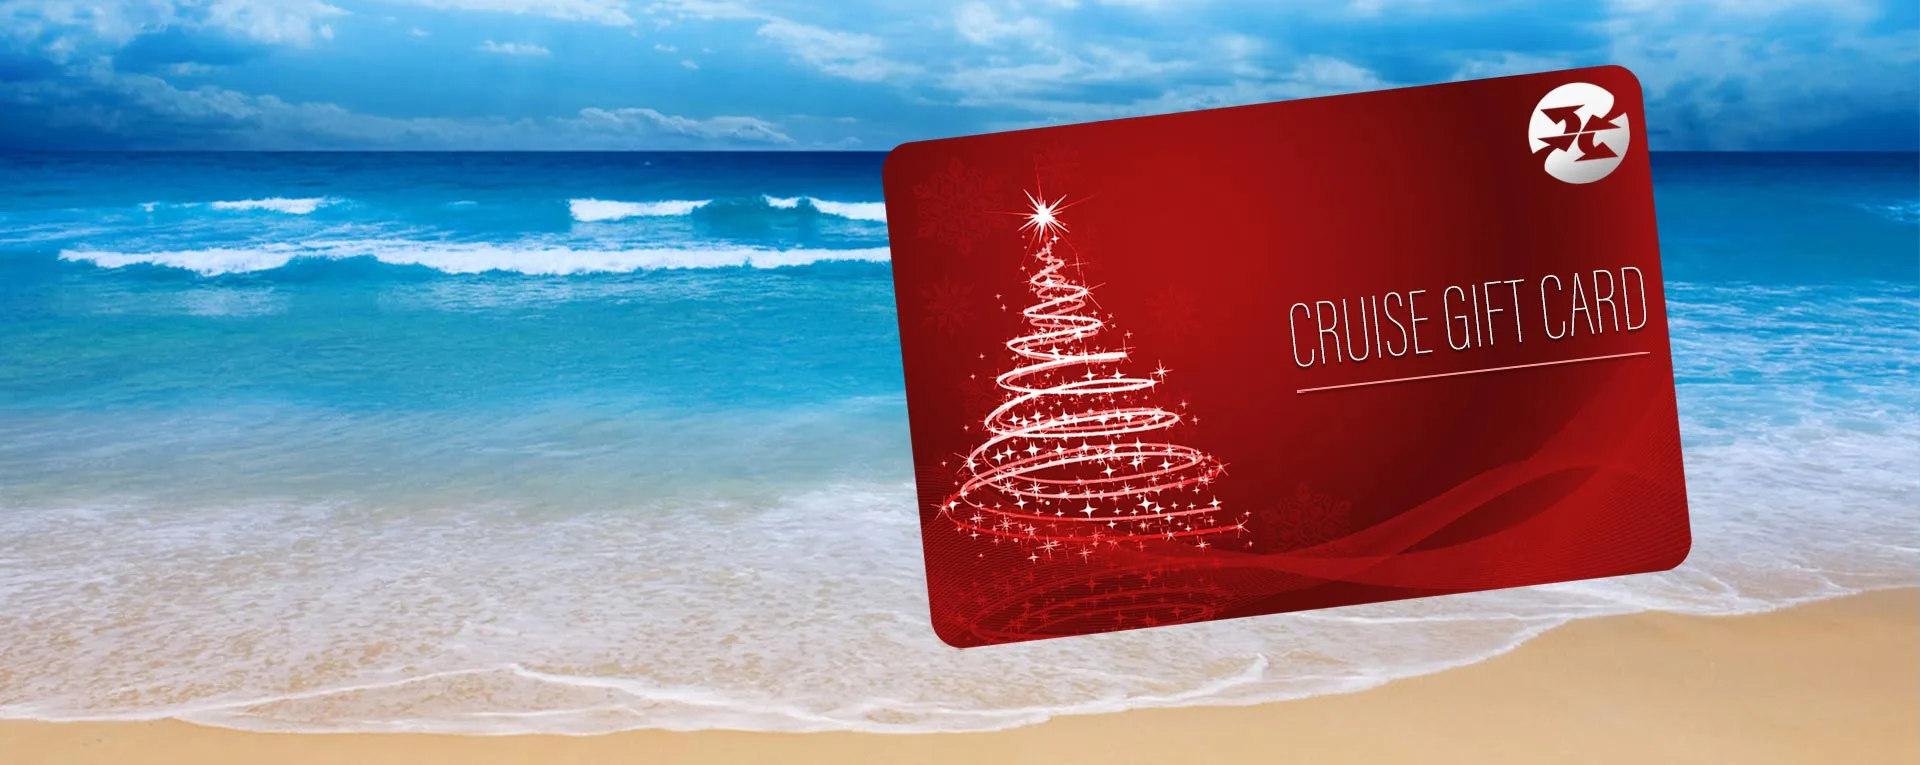 Place a Cruise Gift Card under the tree this year